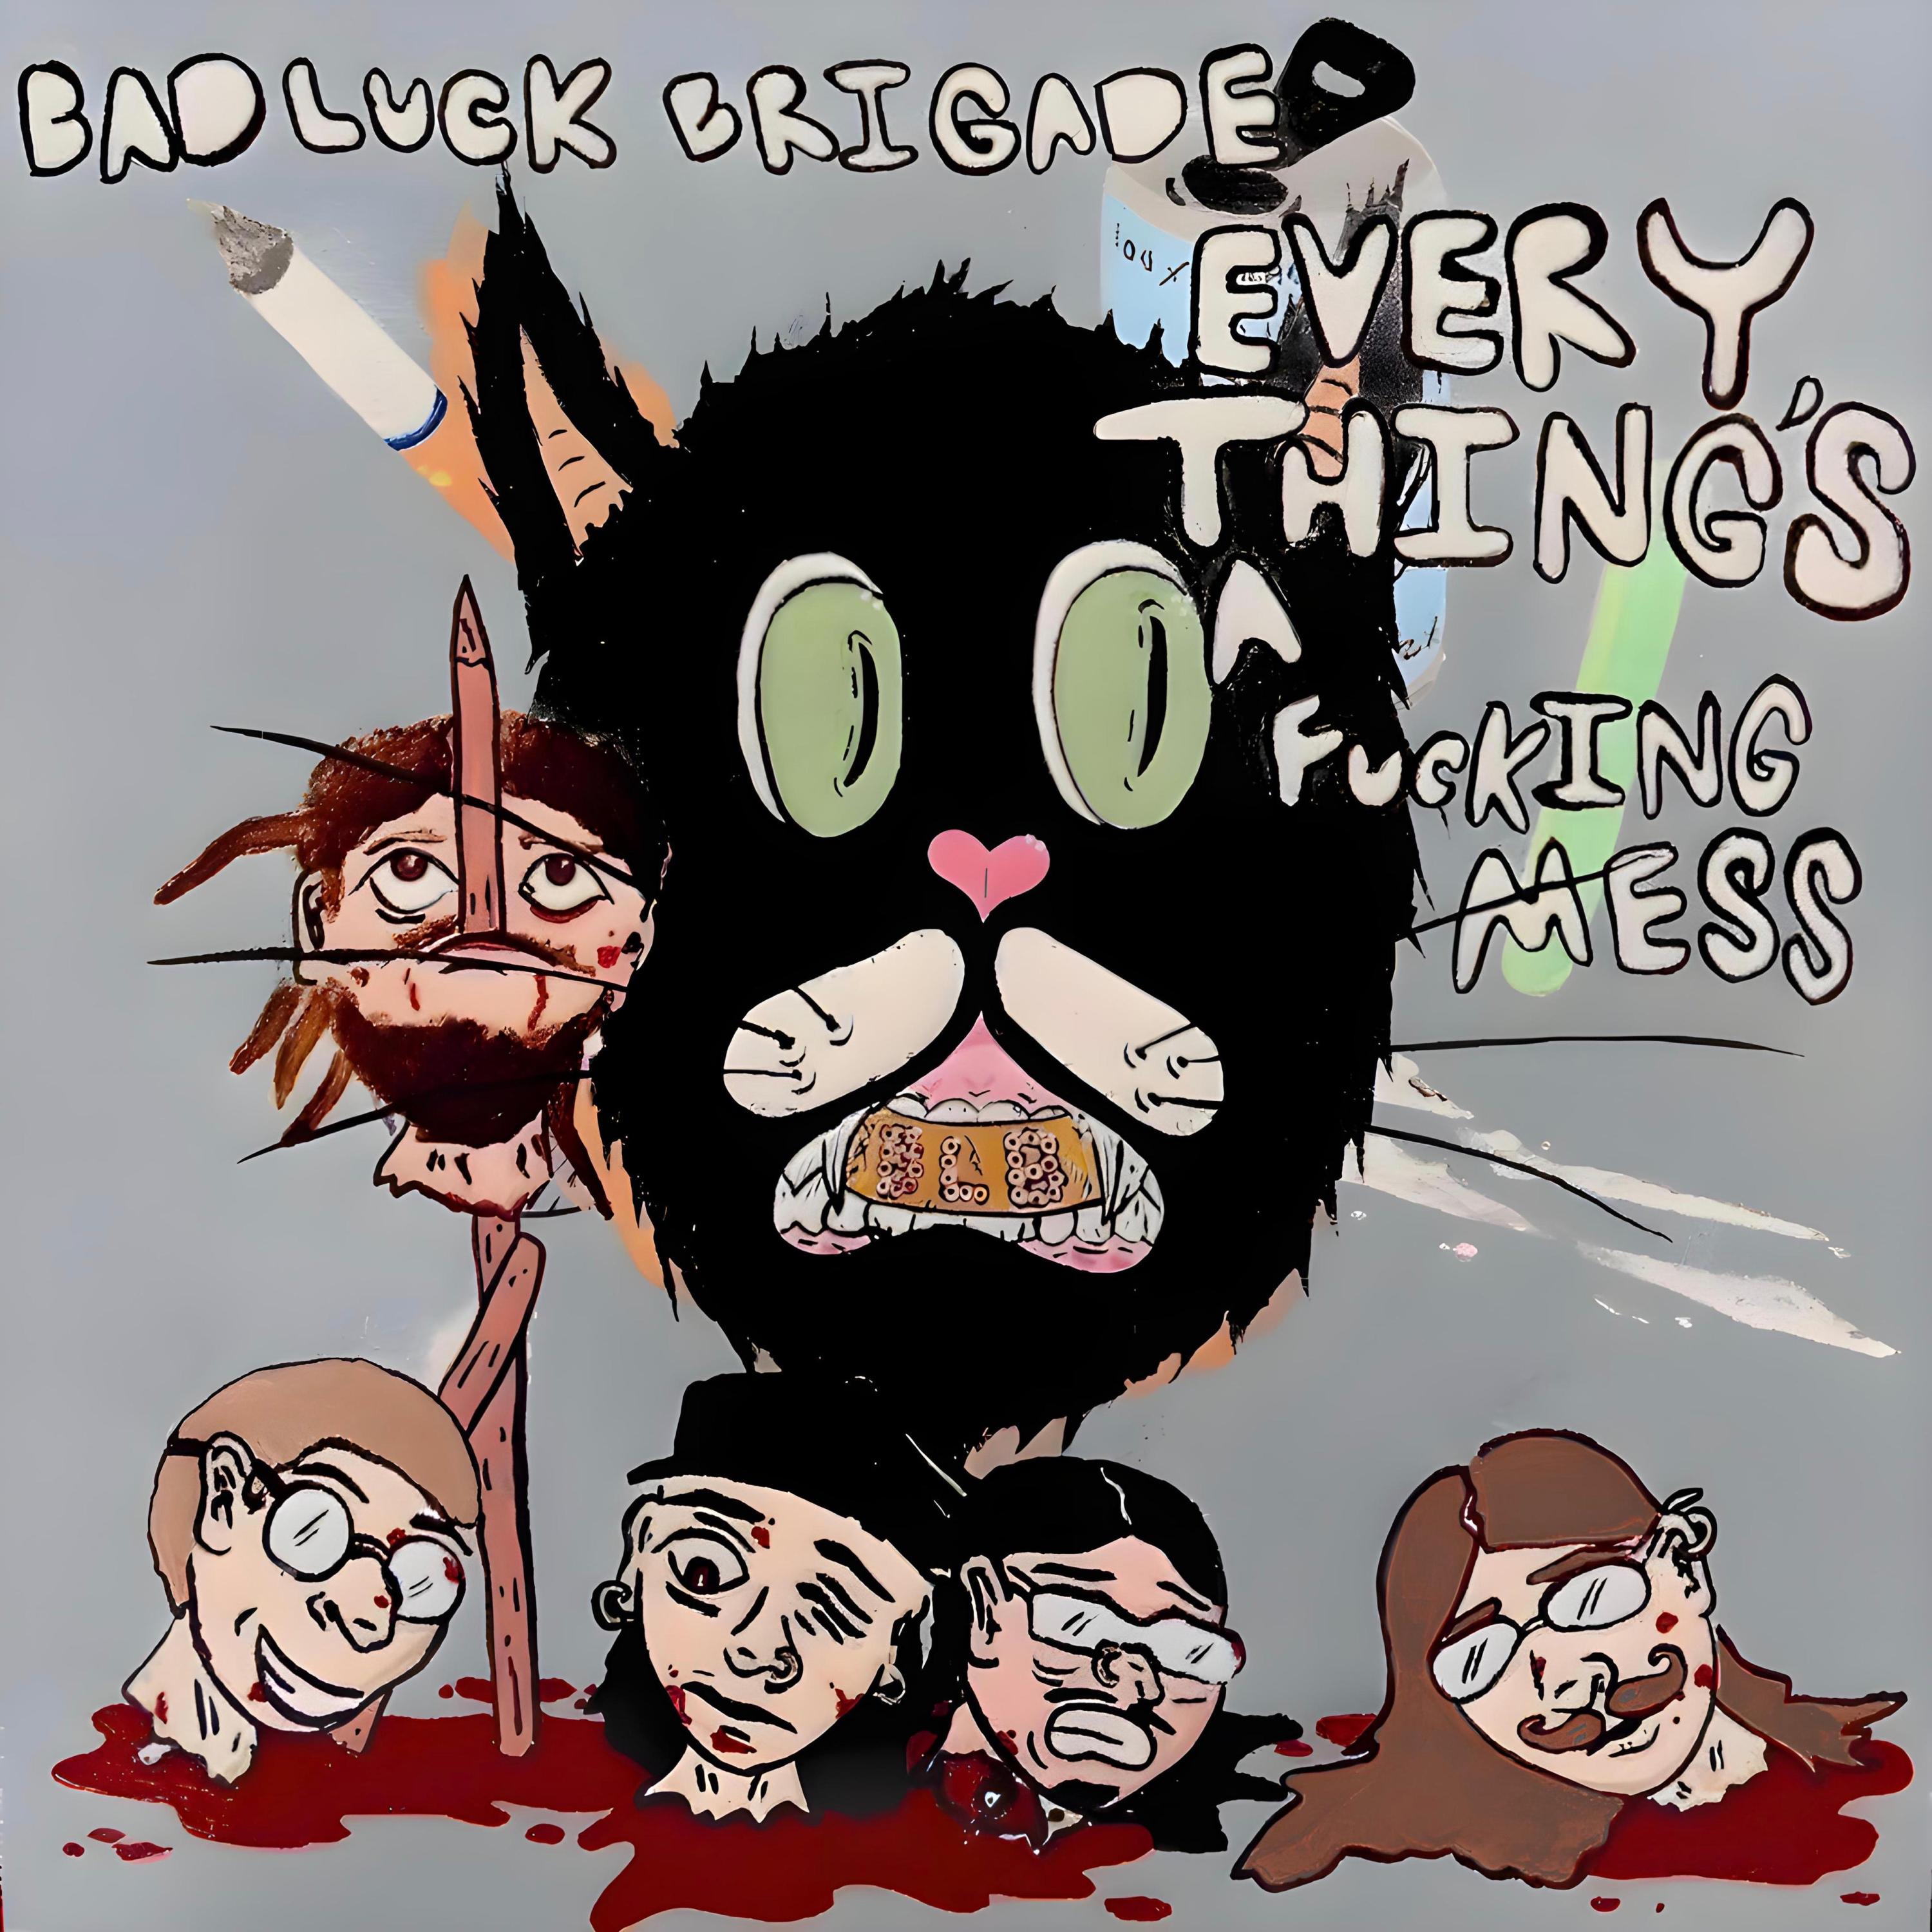 Bad Luck Brigade – EVERYTHING’S A FUCKING MESS